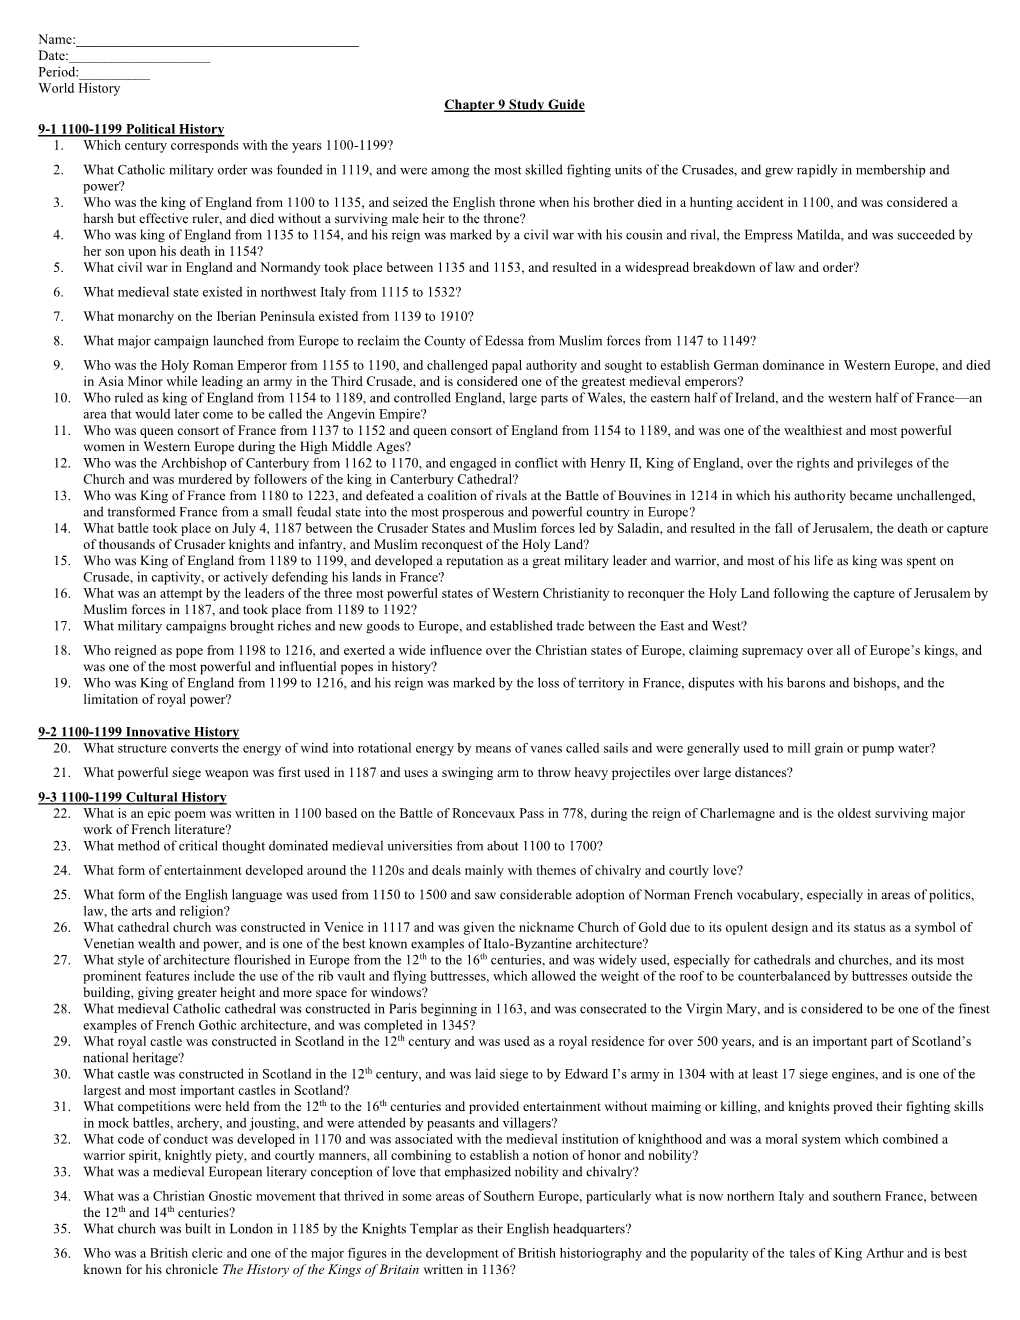 World History Chapter 9 Study Guide 9-1 1100-1199 Political History 1